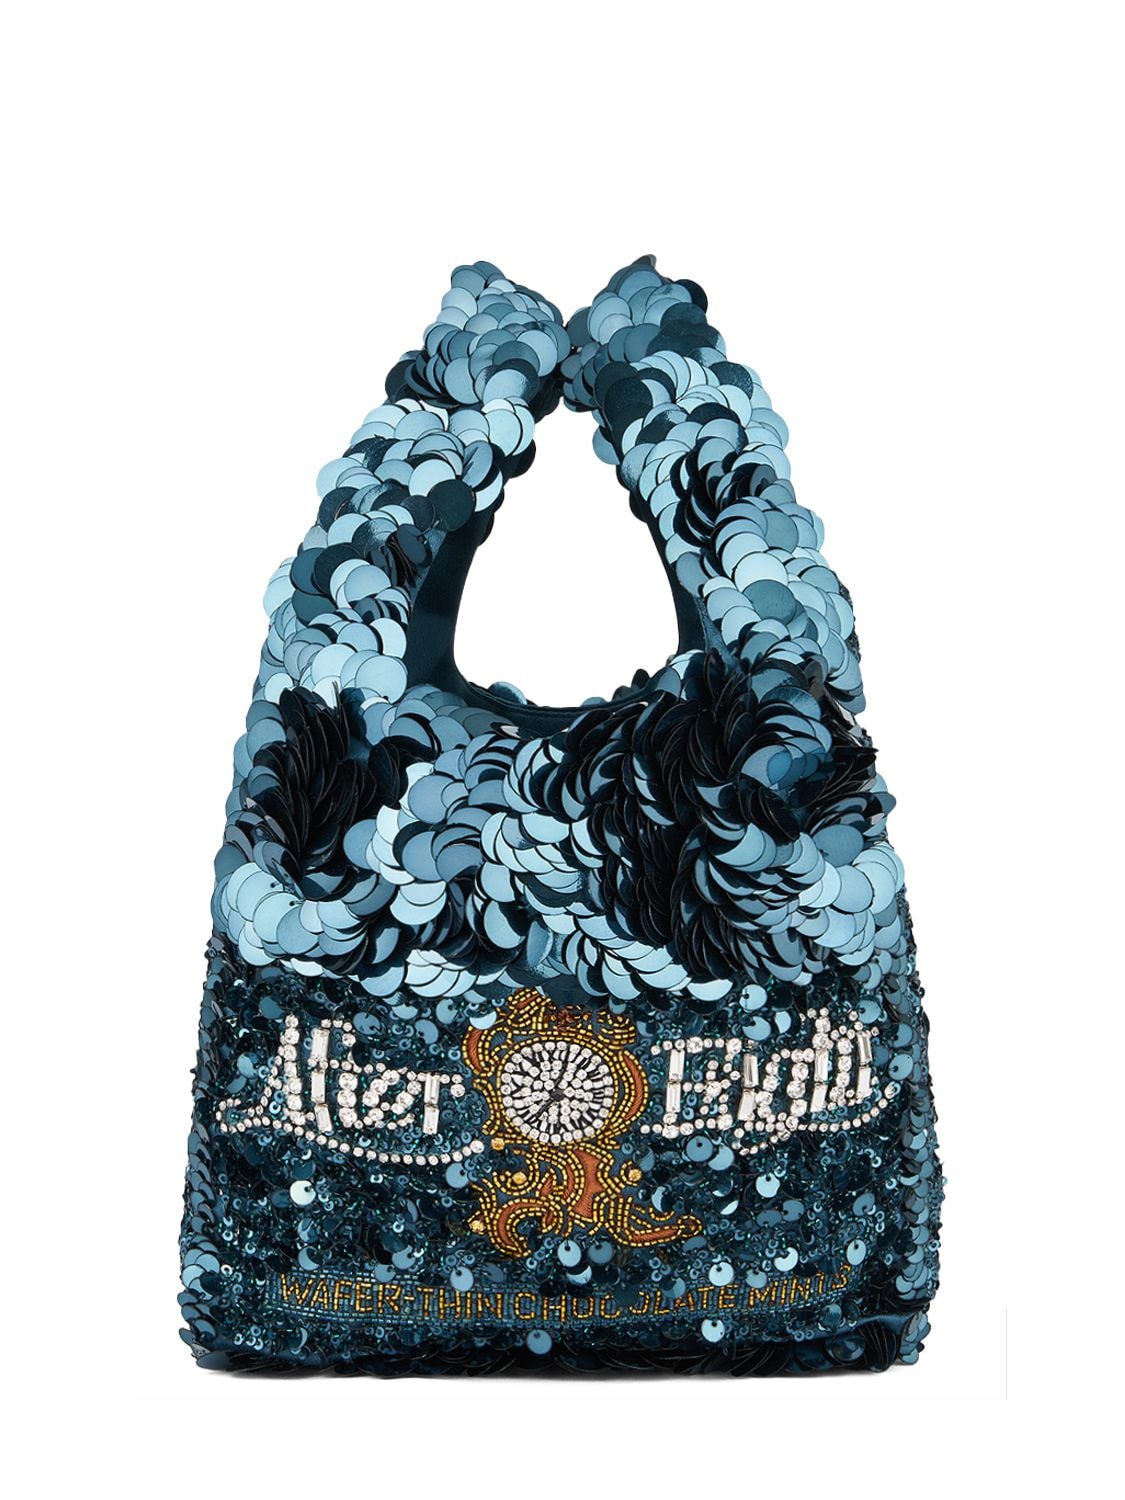 Anya Hindmarch Mini After Eight Sequined Bag In Dark Teal